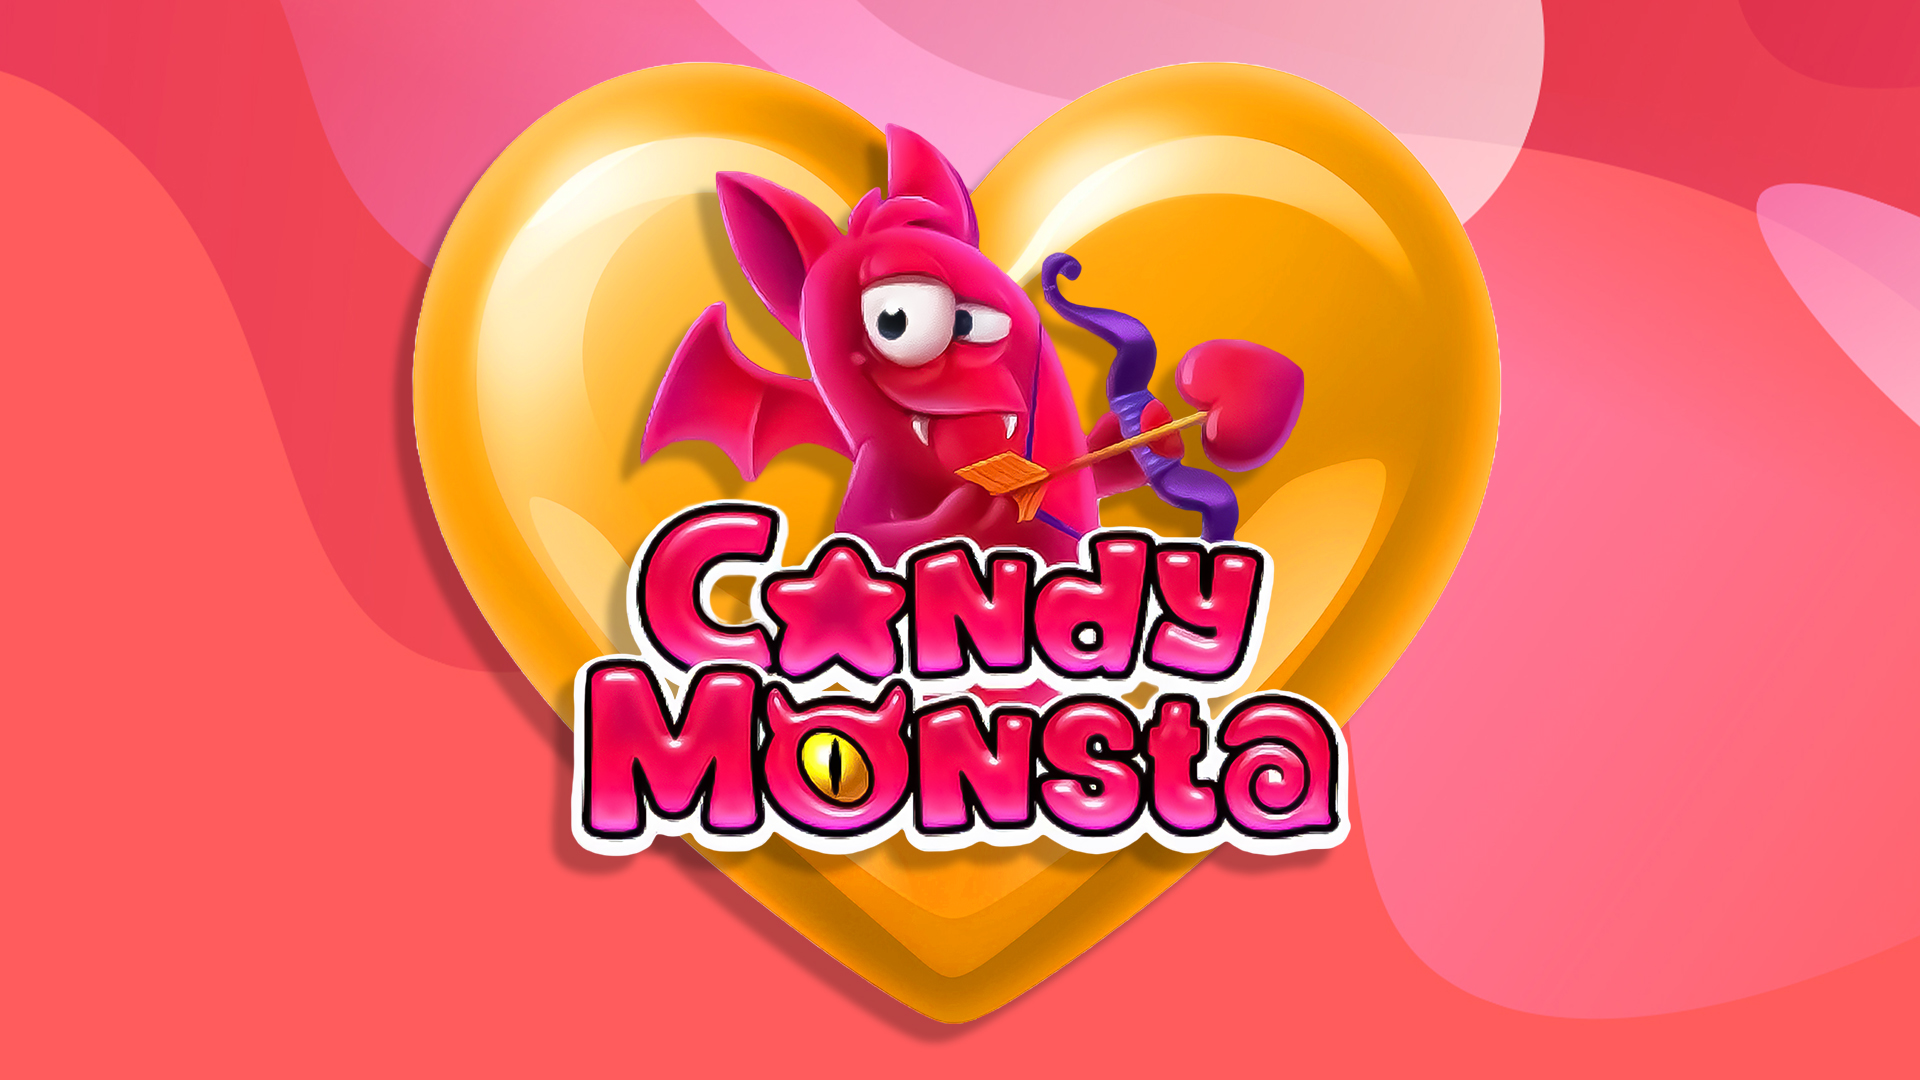 A monster with wings and fangs holds a bow and arrow, inside a golden love heart, while below it reads ‘Candy Monsta’, on a multi tone red and pink background.